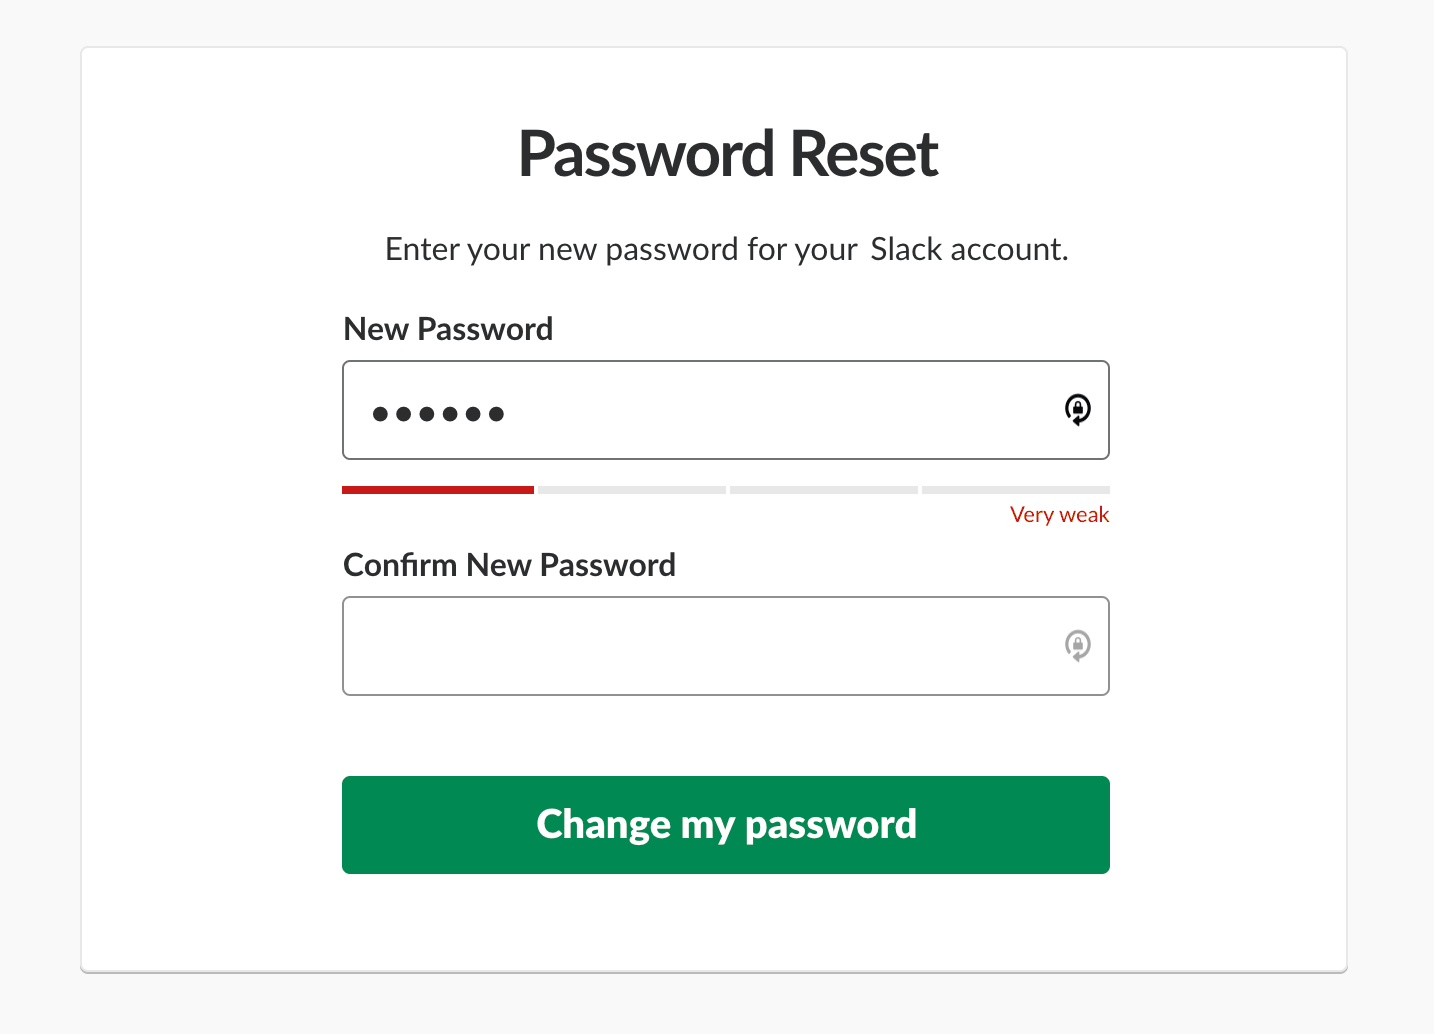 A gif of Mailchimp giving feedback on your password strength